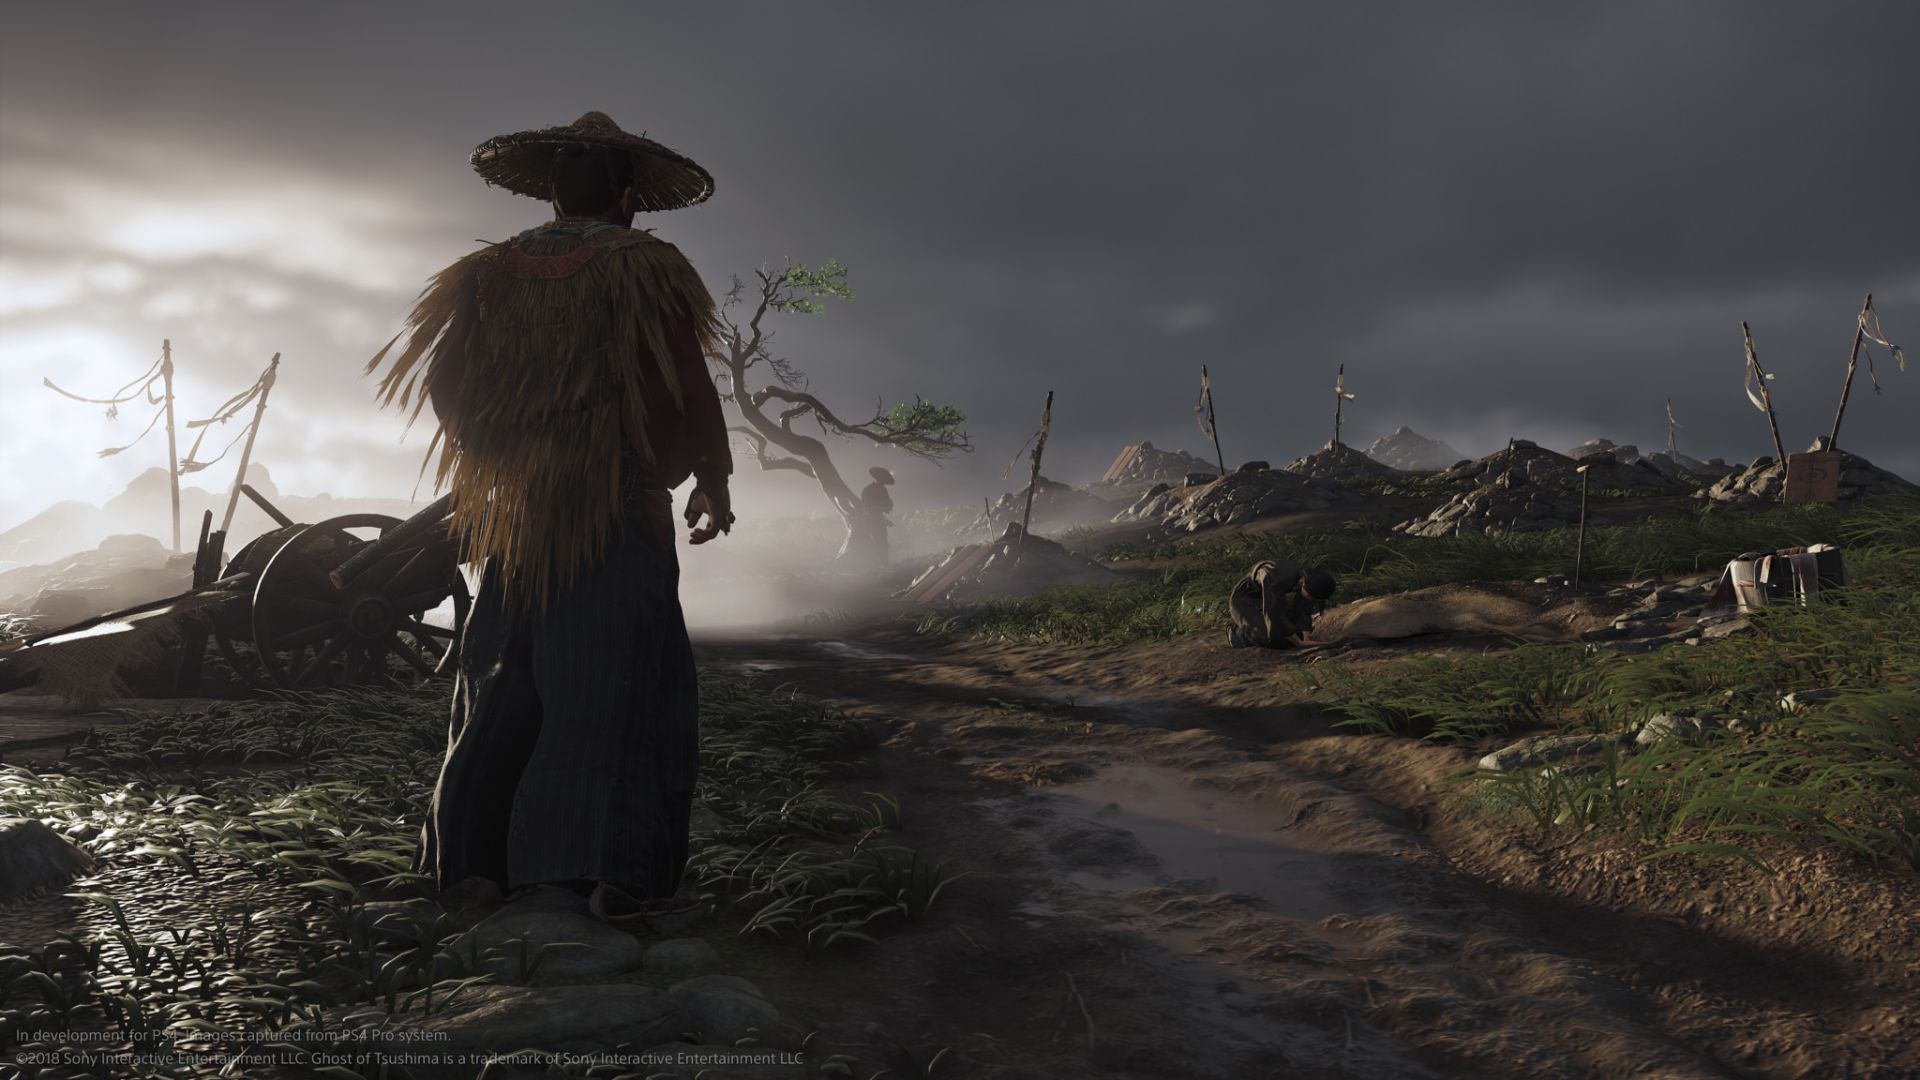 Sony E3 2018 Trailers for The Last of Us 2, Ghost of Tsushima, and More | Collider